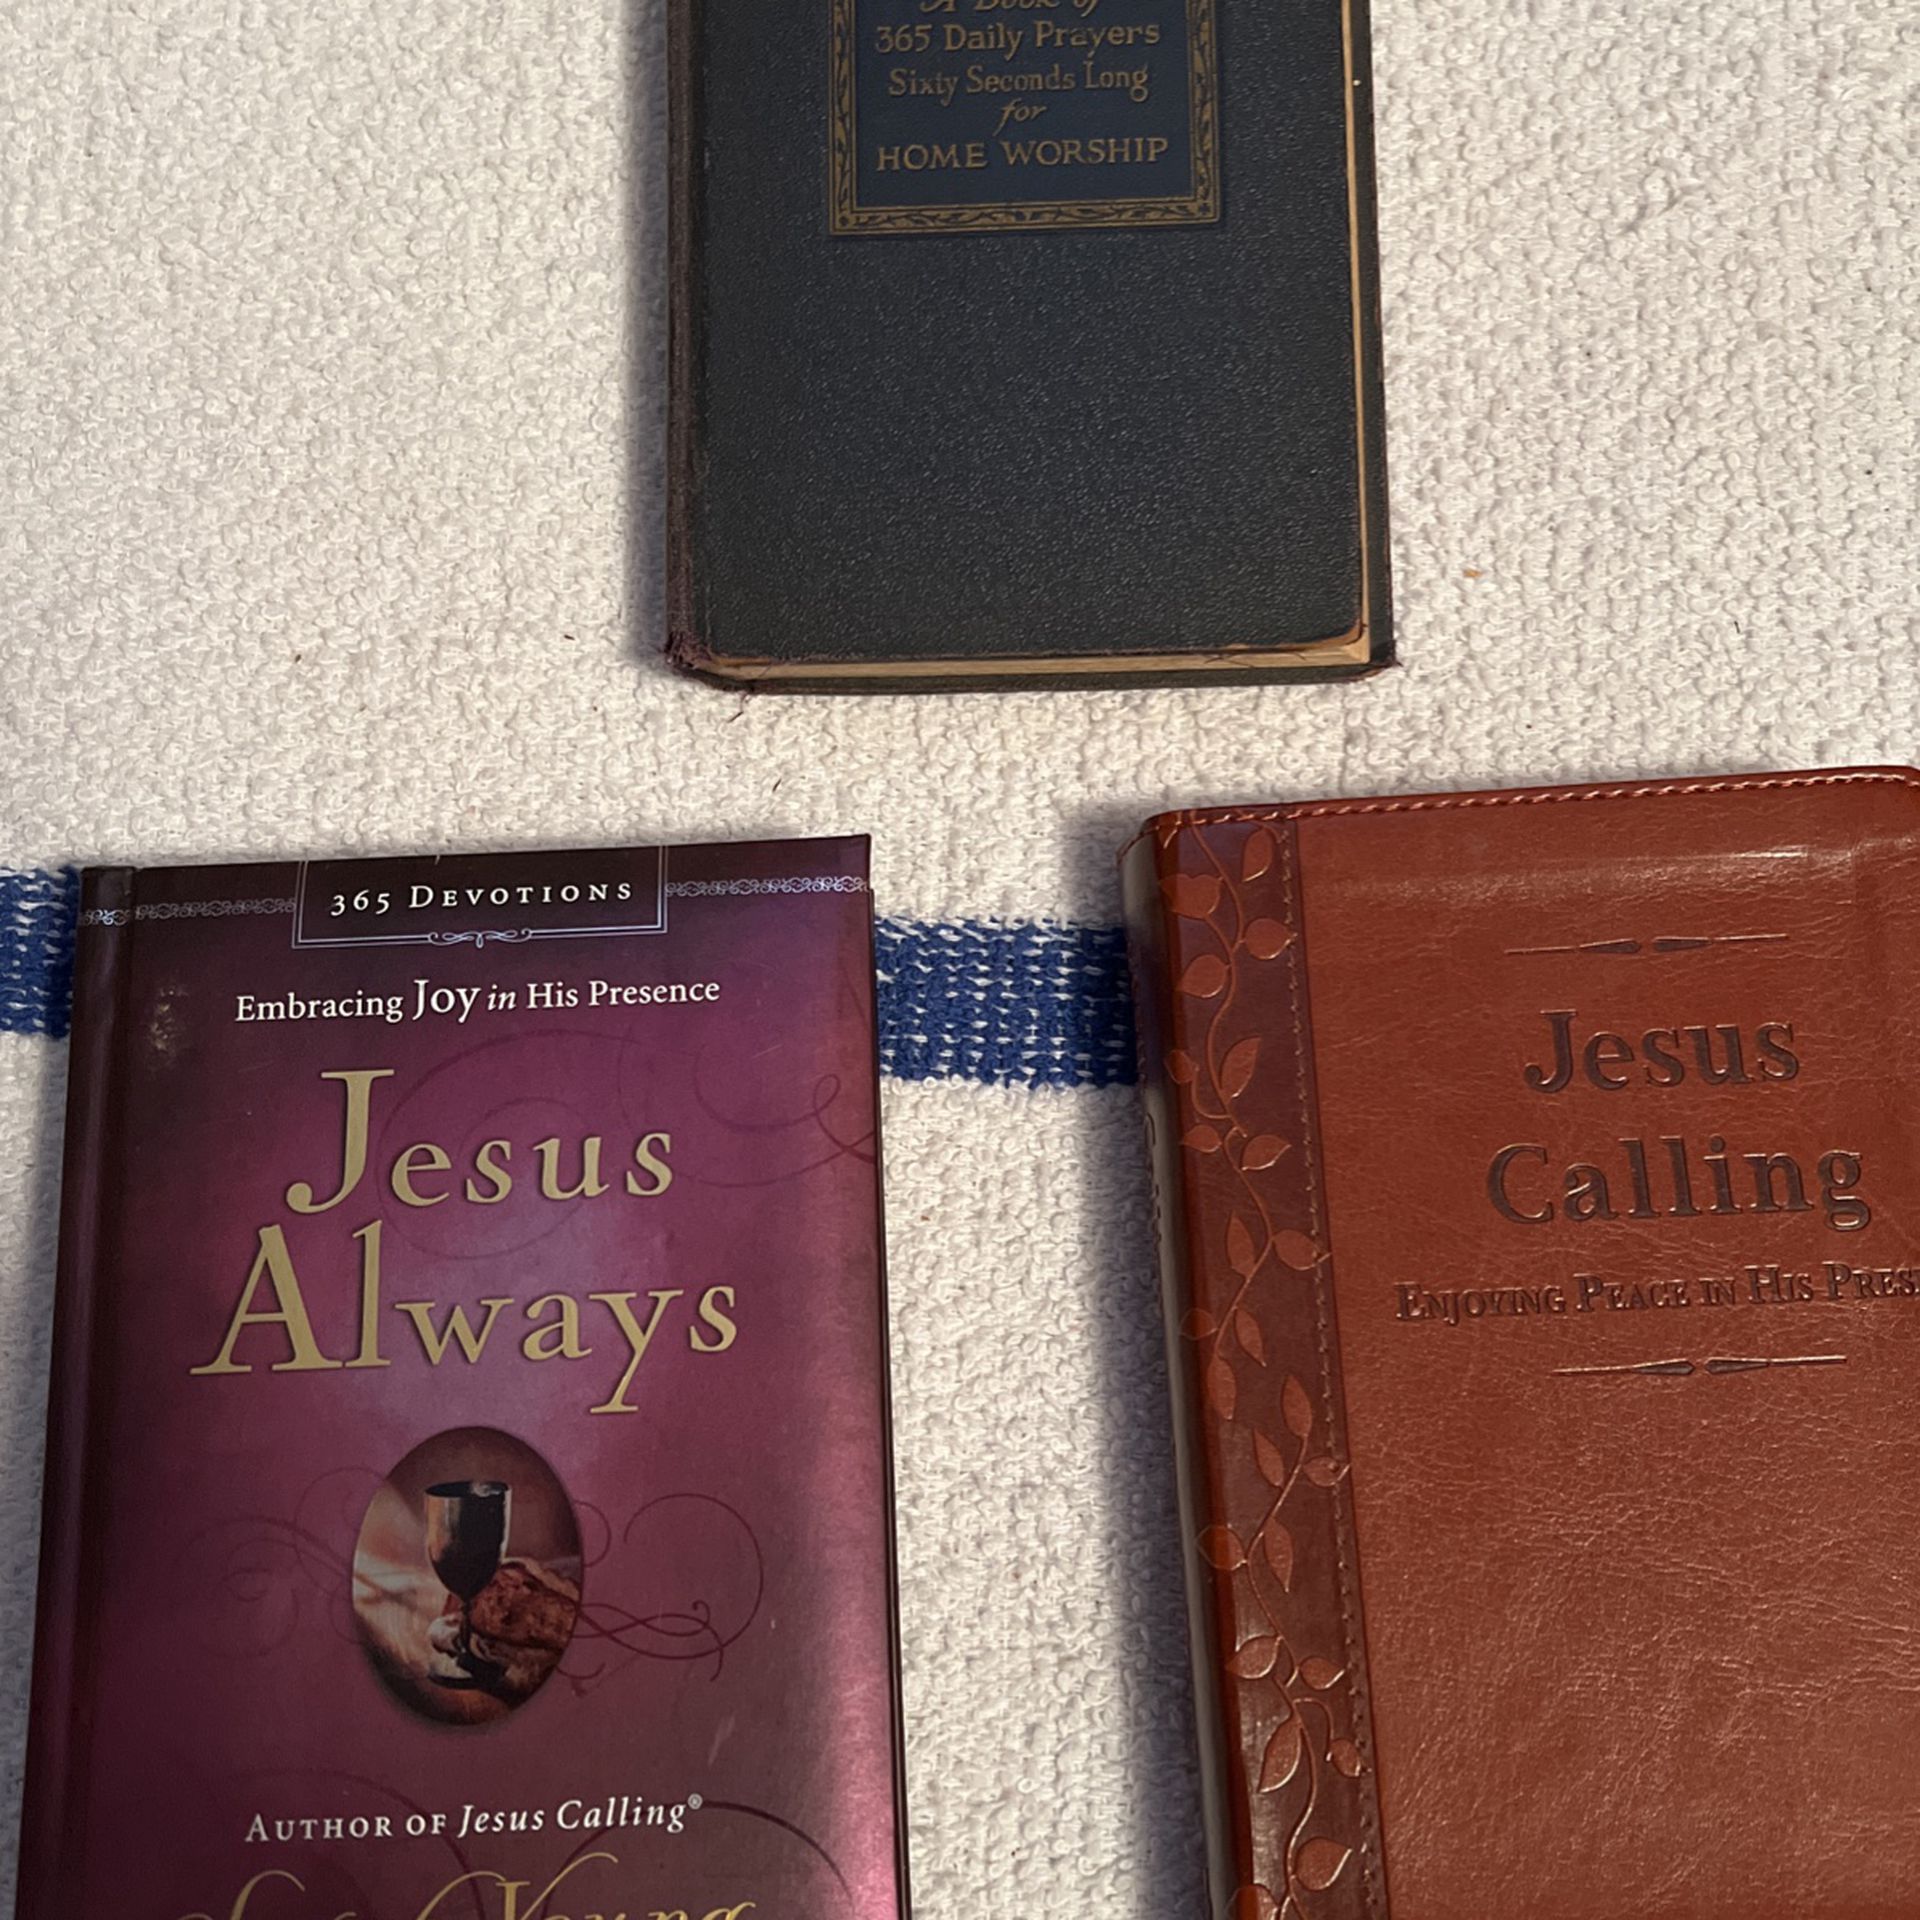 3 small books about Jesus